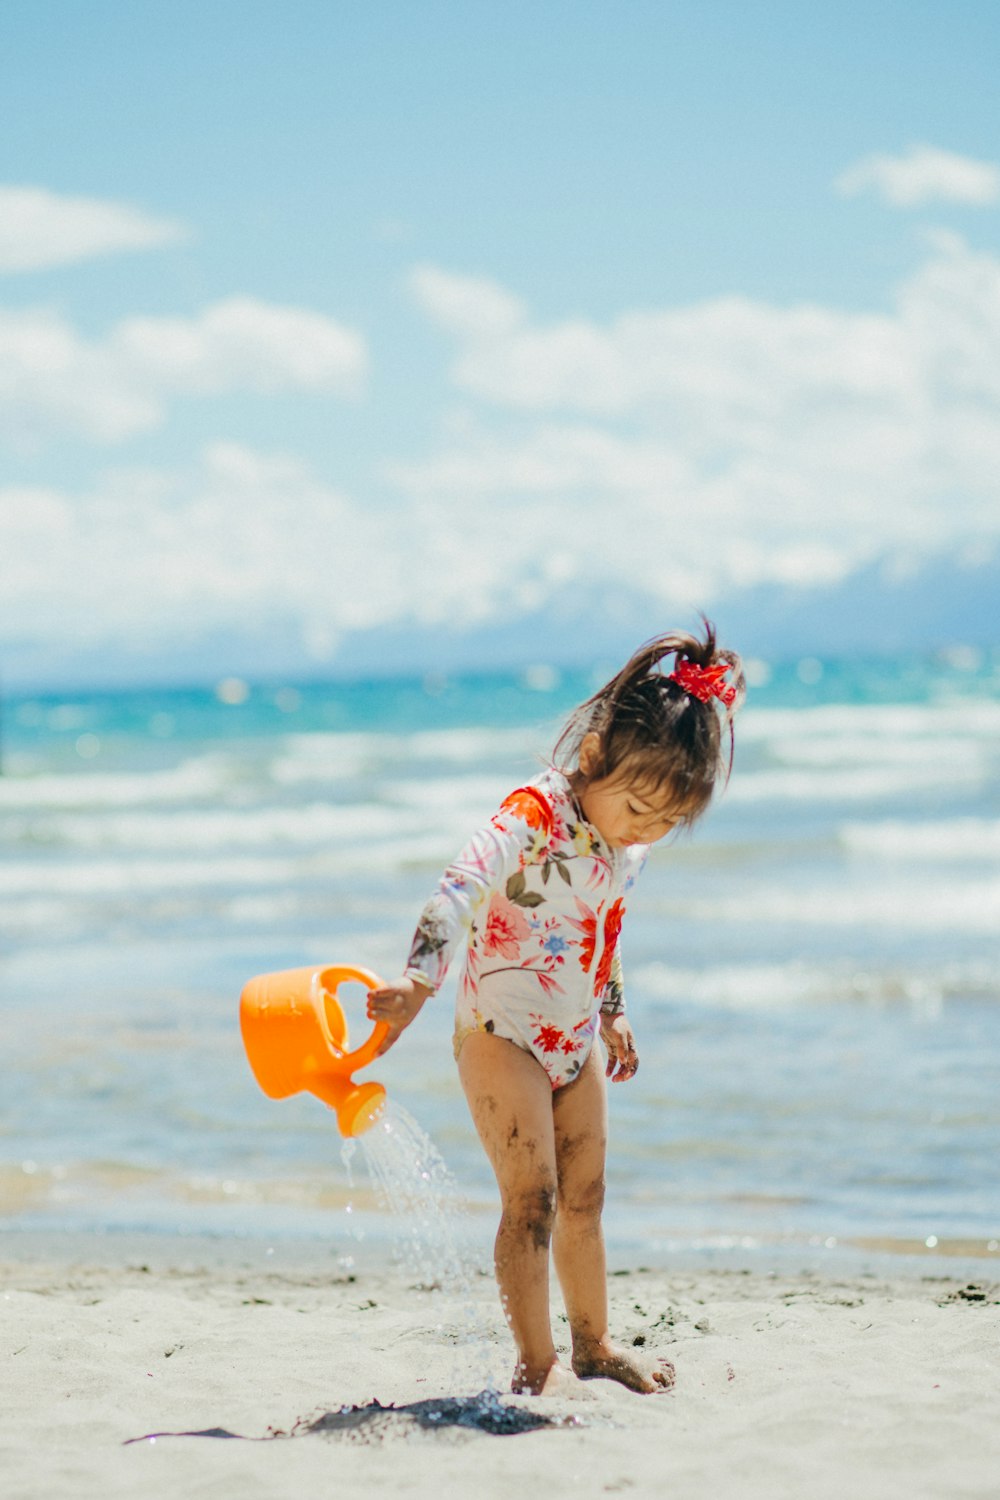 girl in white and pink floral shirt holding orange plastic bucket on beach during daytime